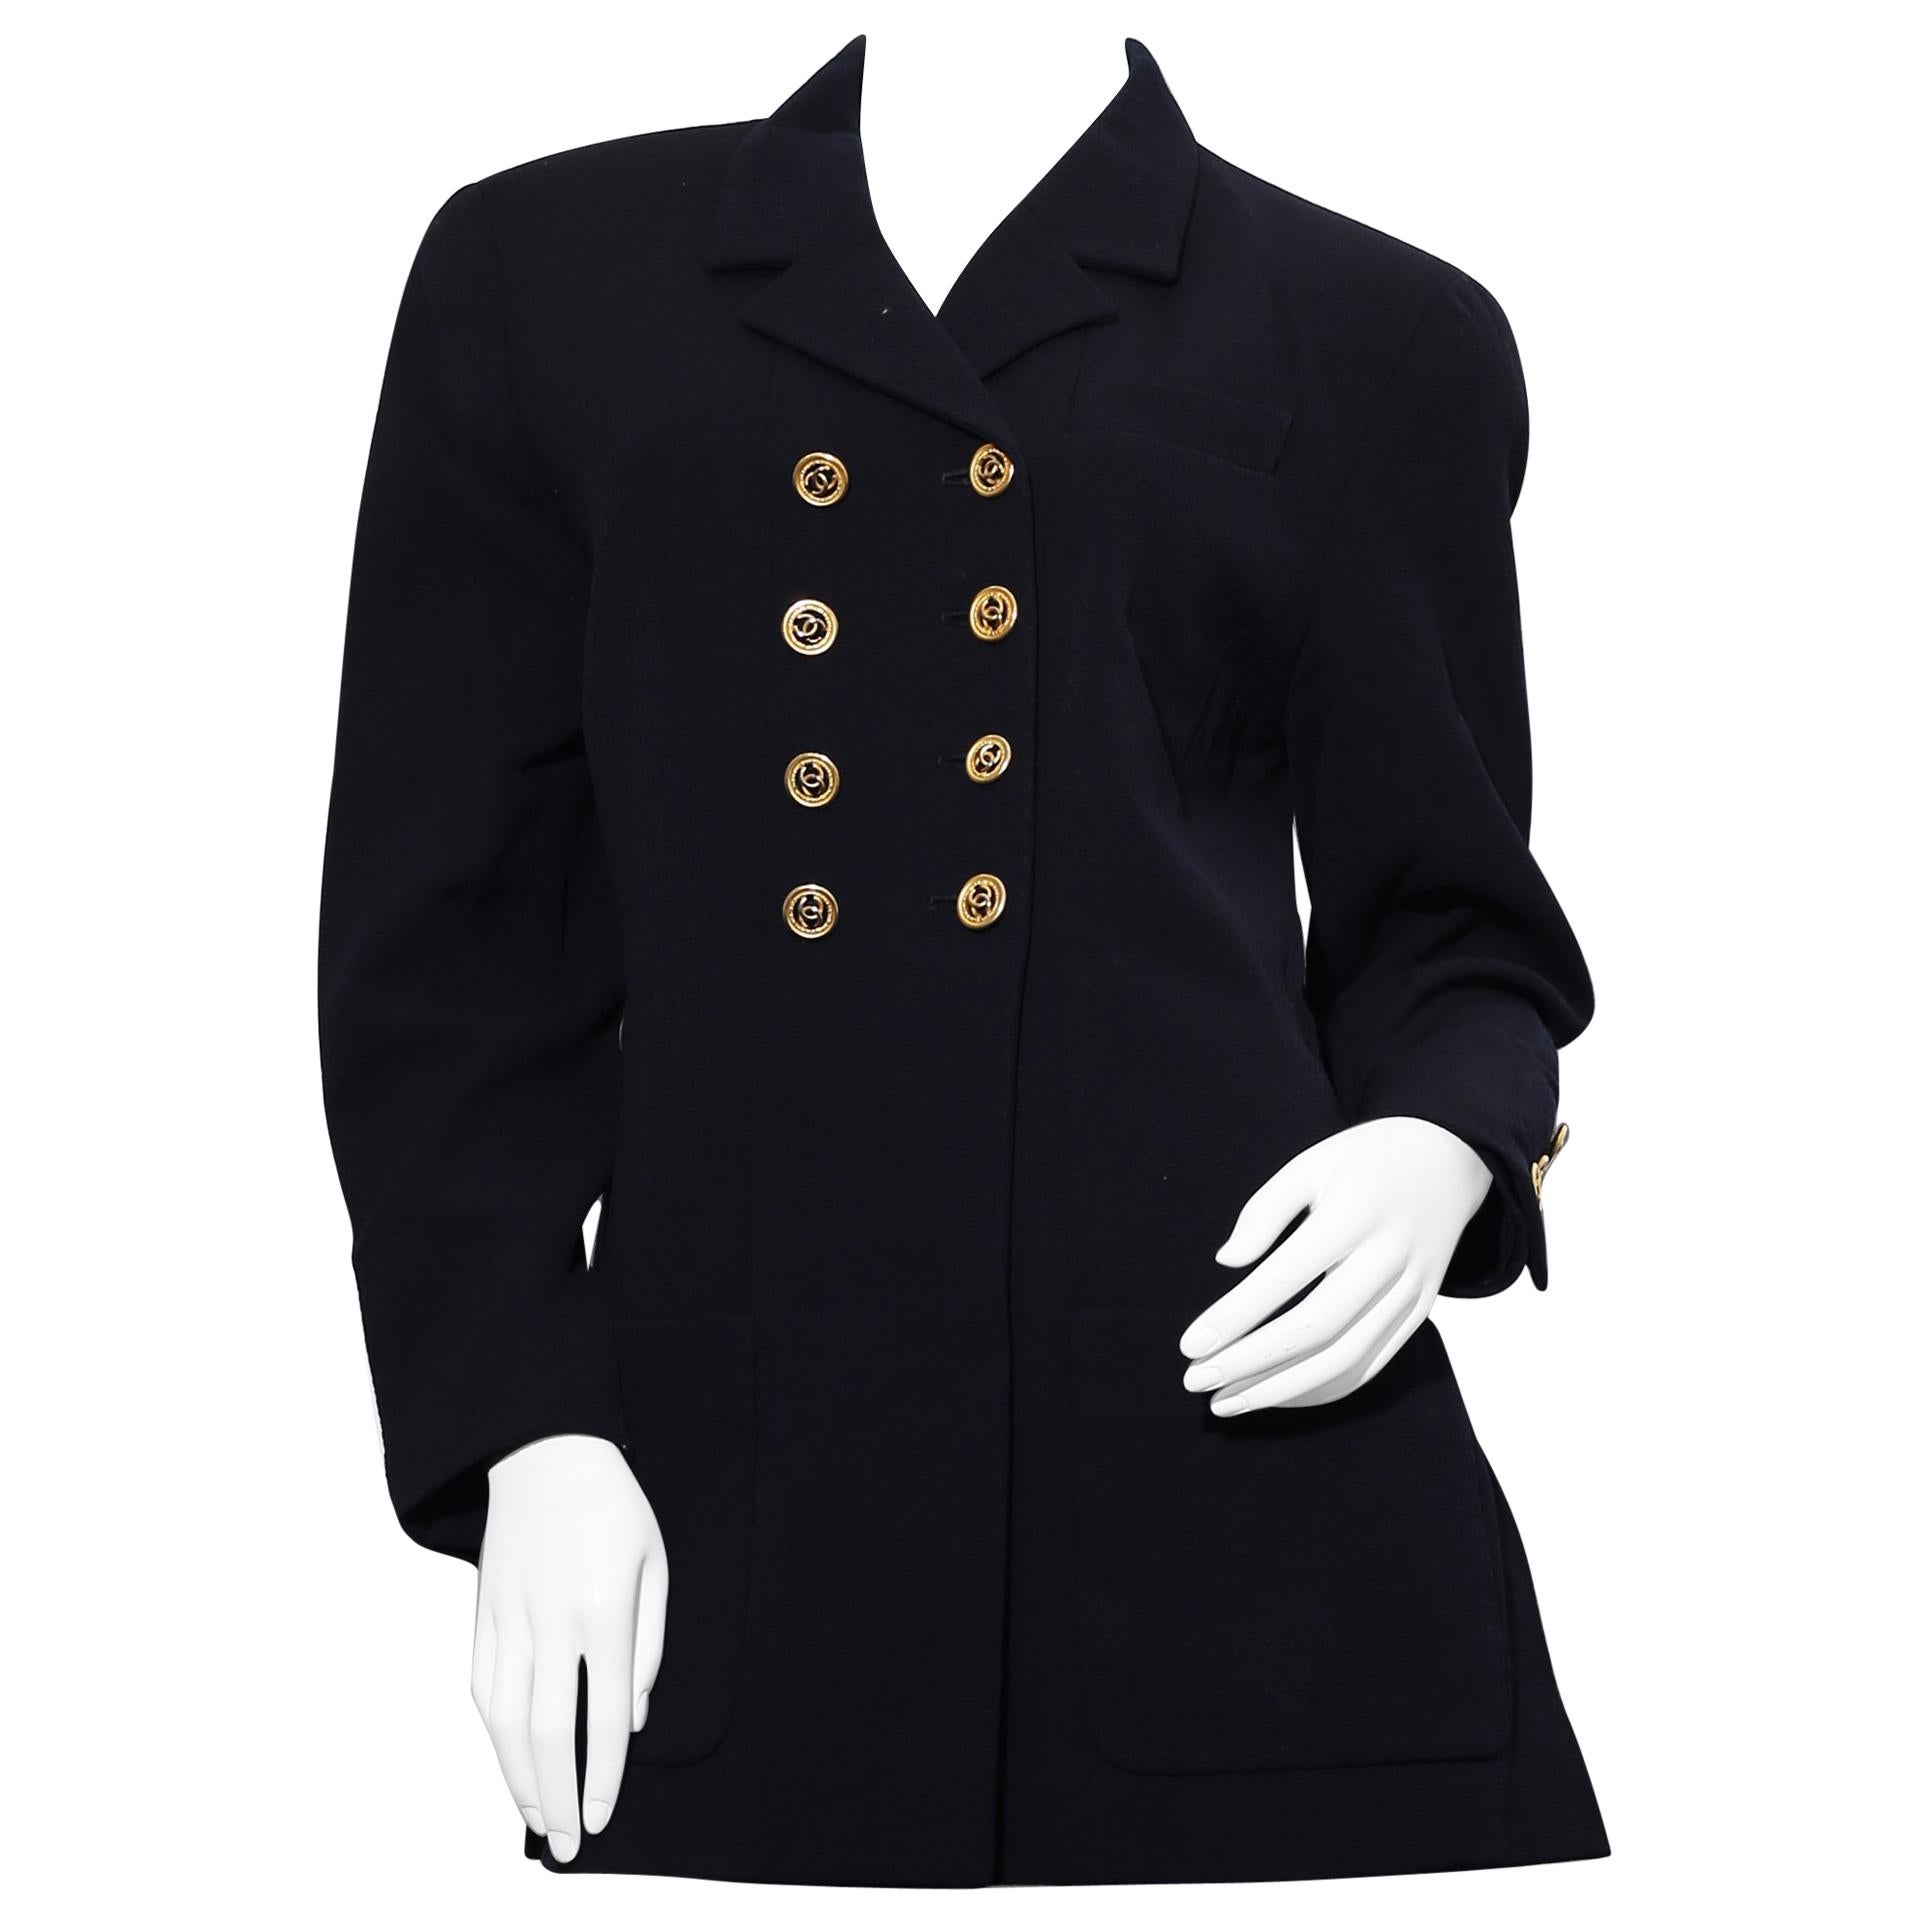 Vintage Chanel Boutique  navy blue jacket with double  golden chanel  buttons